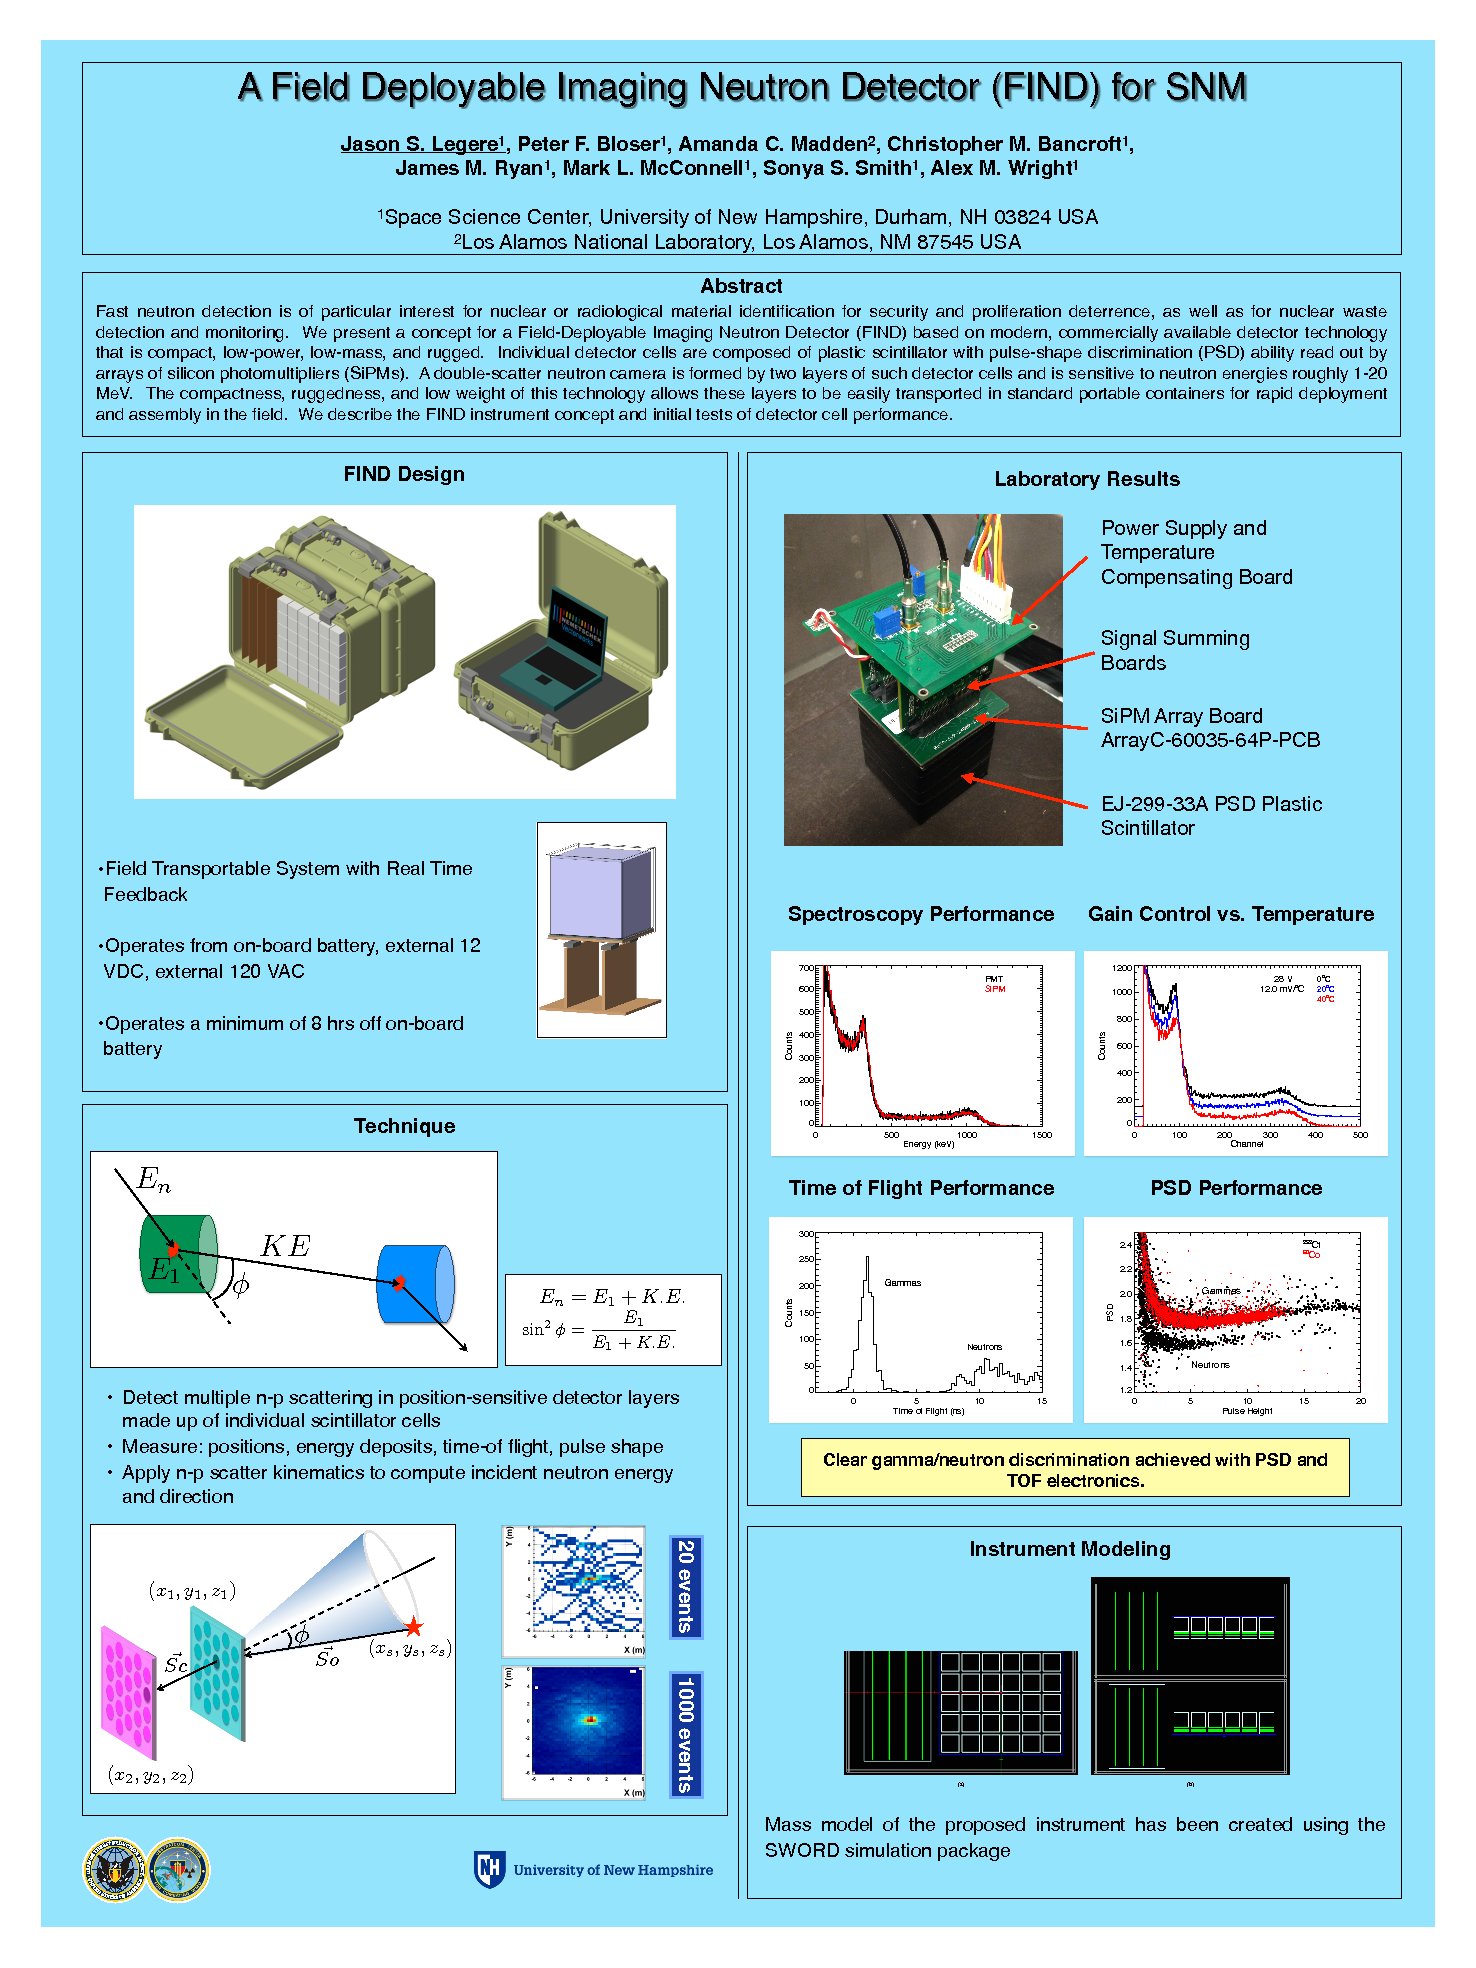 A Field Deployable Imaging Neutron Detector (Find) For Snm by pbloser